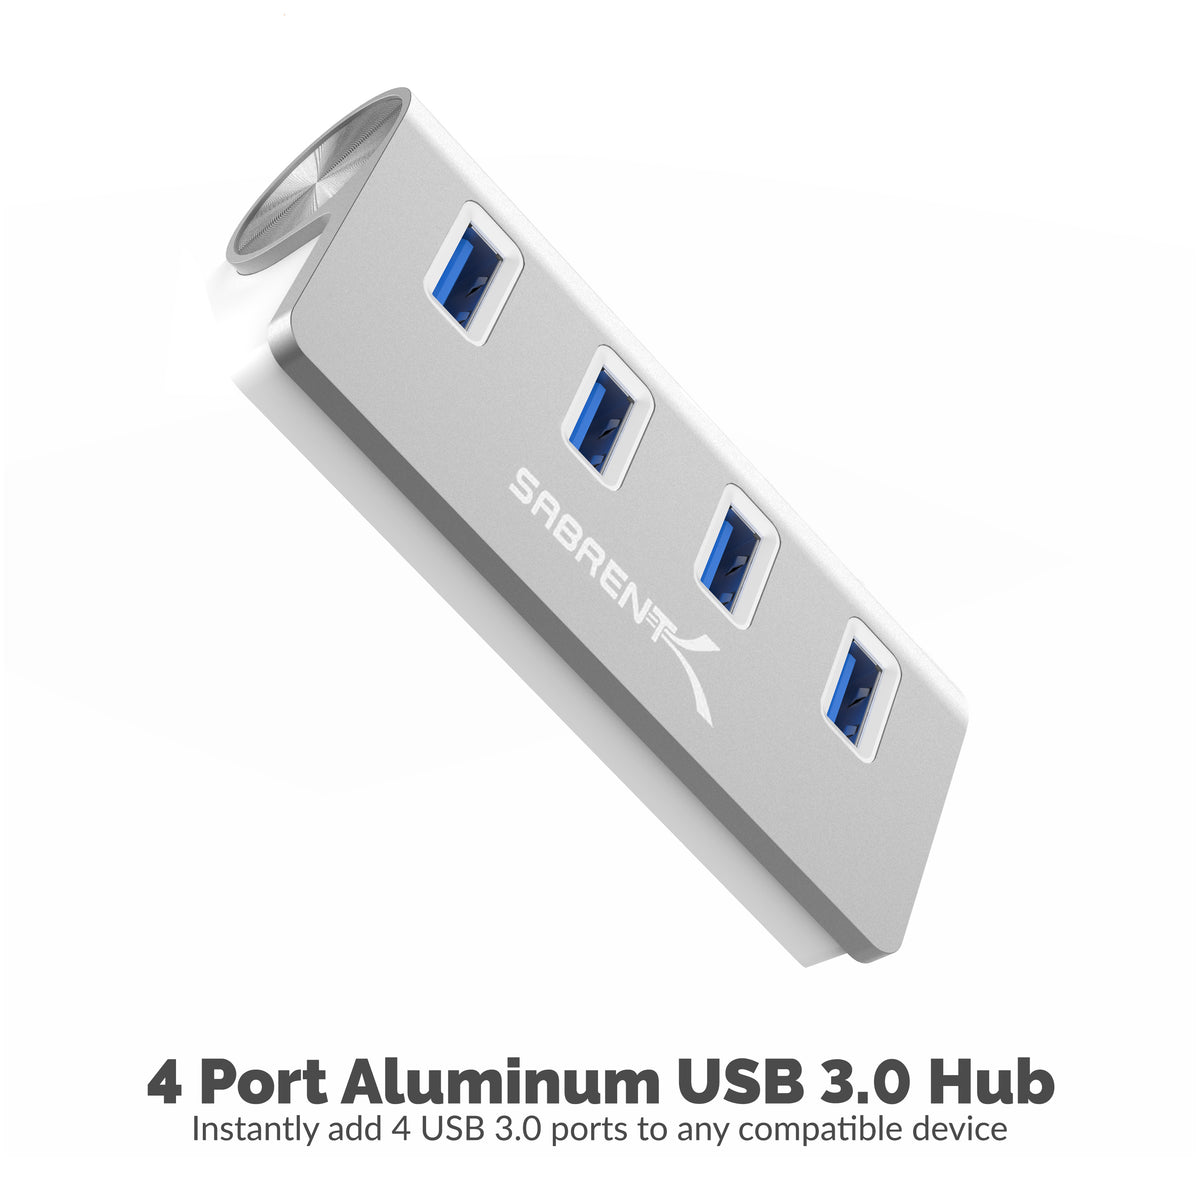 Premium 4 Port Aluminum USB 3.0 Hub (30&quot; Cable) for iMac, MacBook, MacBook Pro, MacBook Air, Mac Mini, or Any PC [Silver] 5V/4A Power Adapter Included